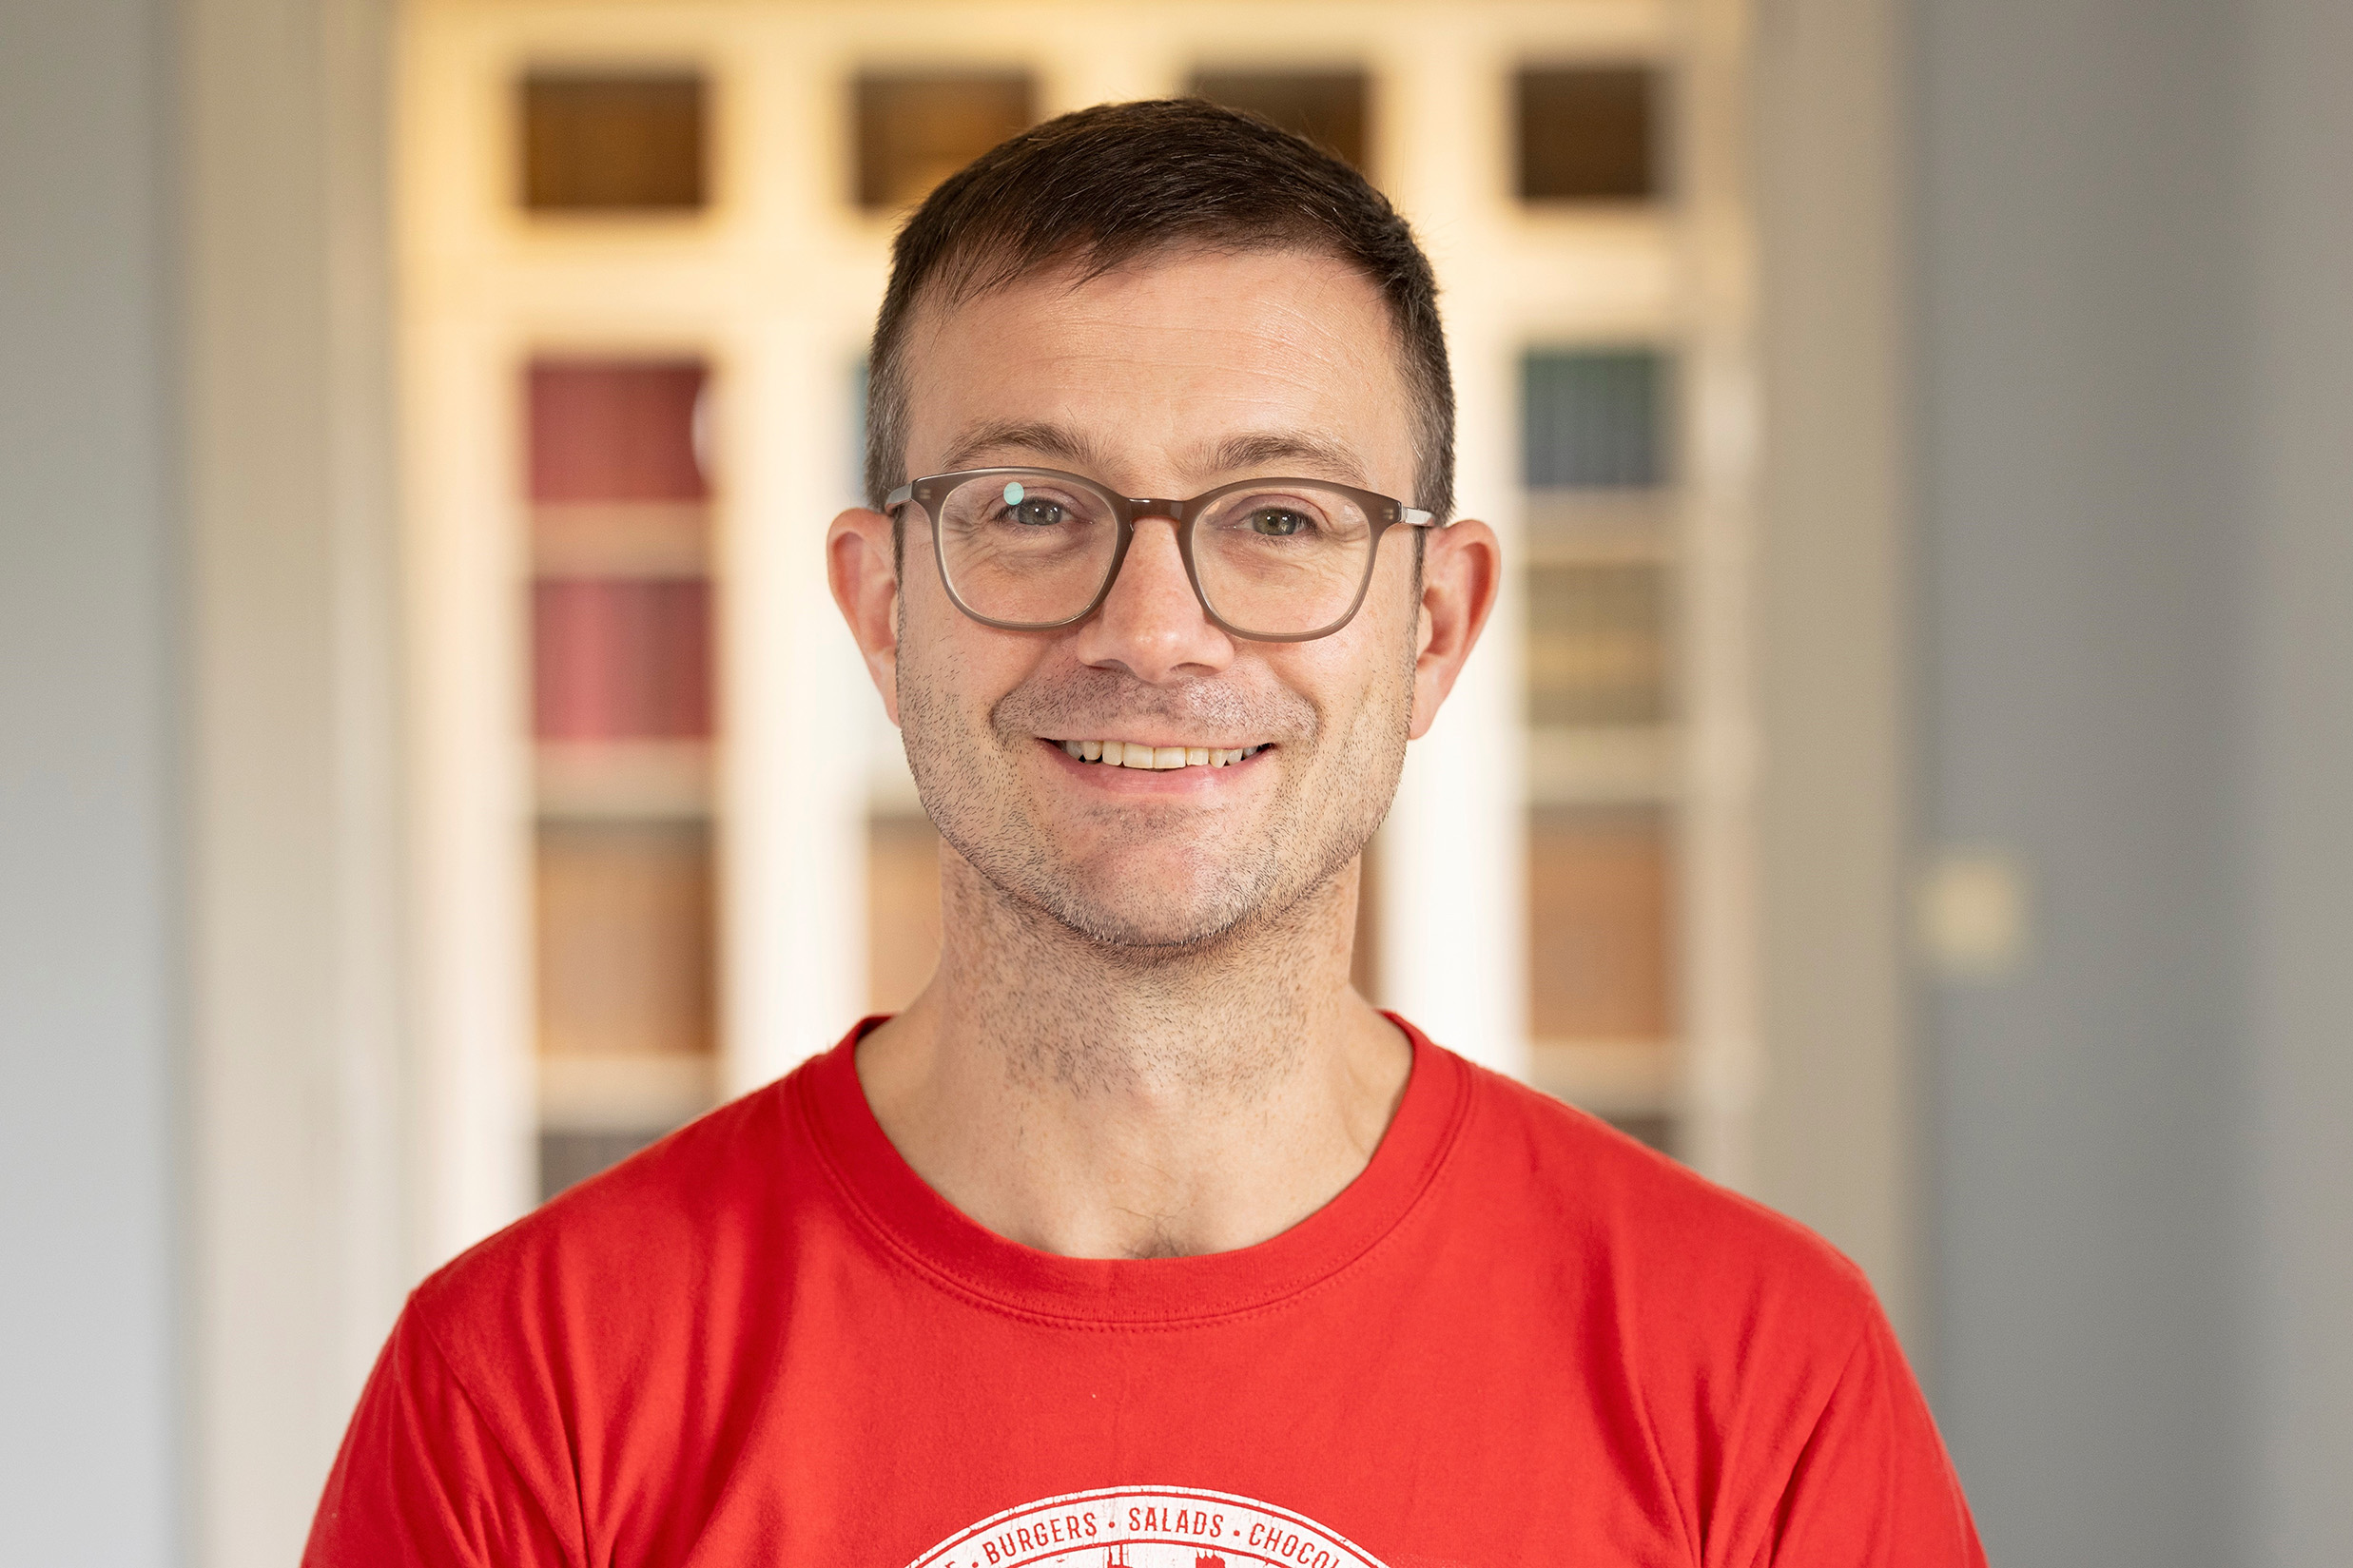 A head and shoulders portrait photograph of Jerome De Groot smiling in a red t-shirt